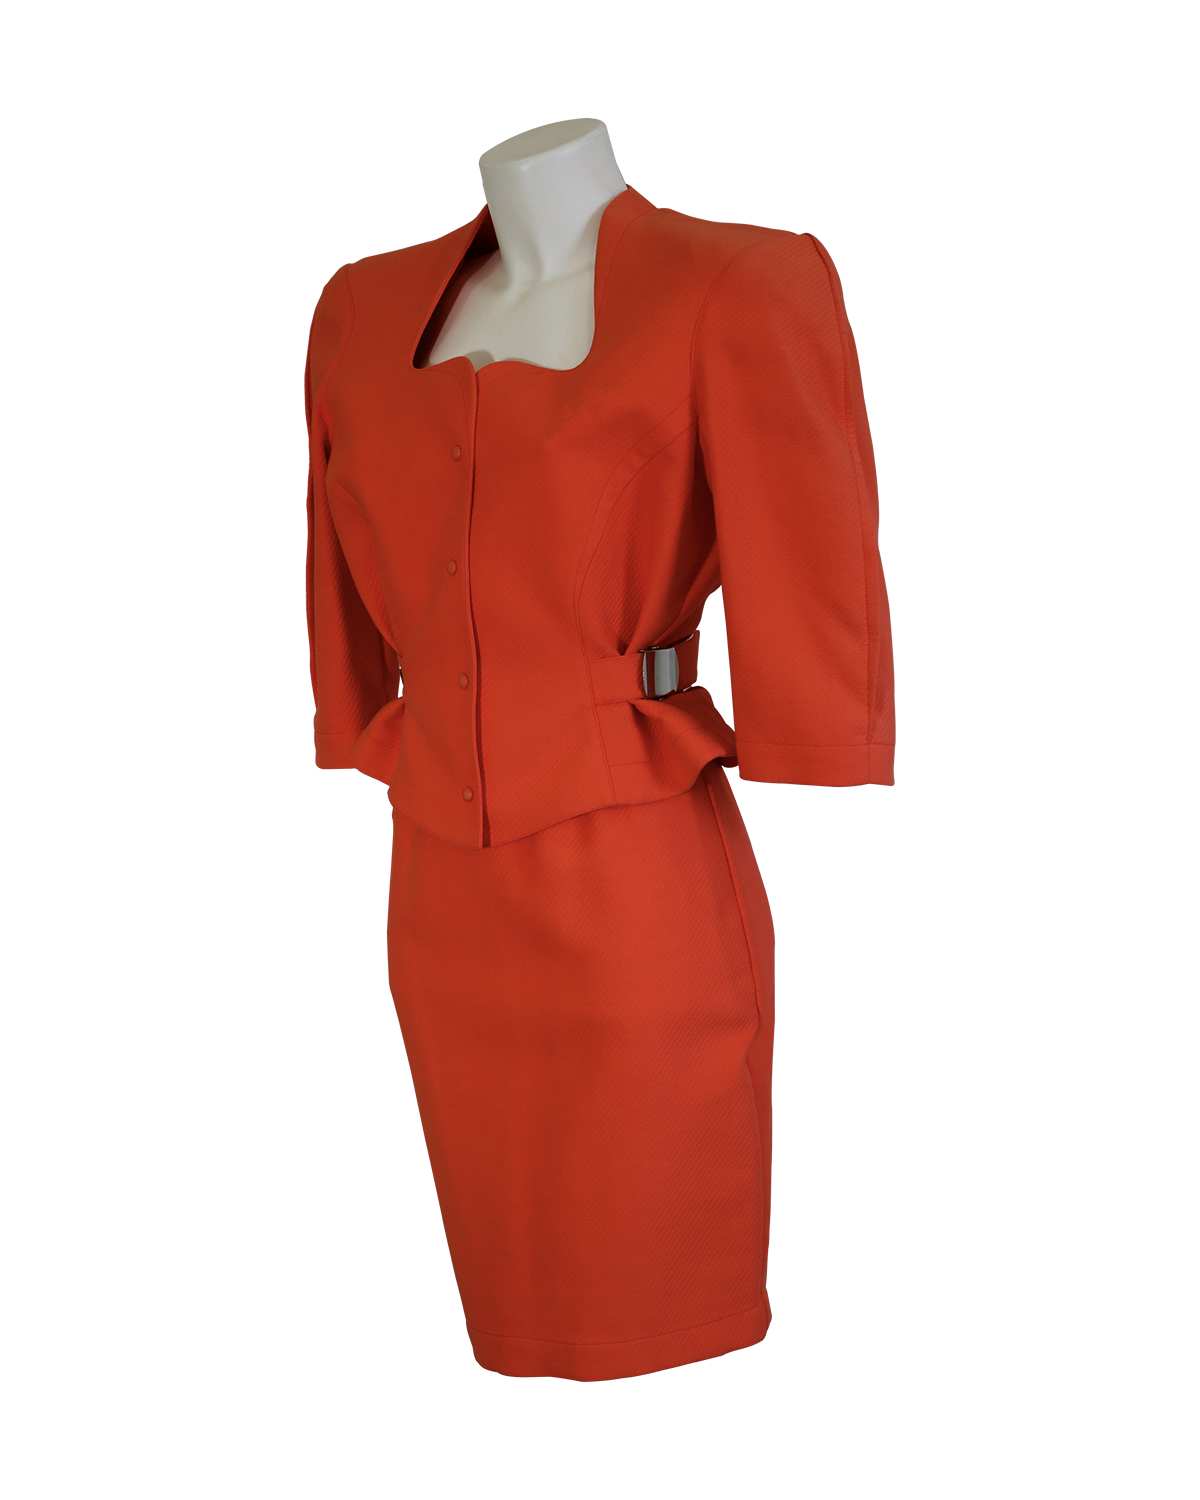 Thierry Mugler Red Suit from 1980s